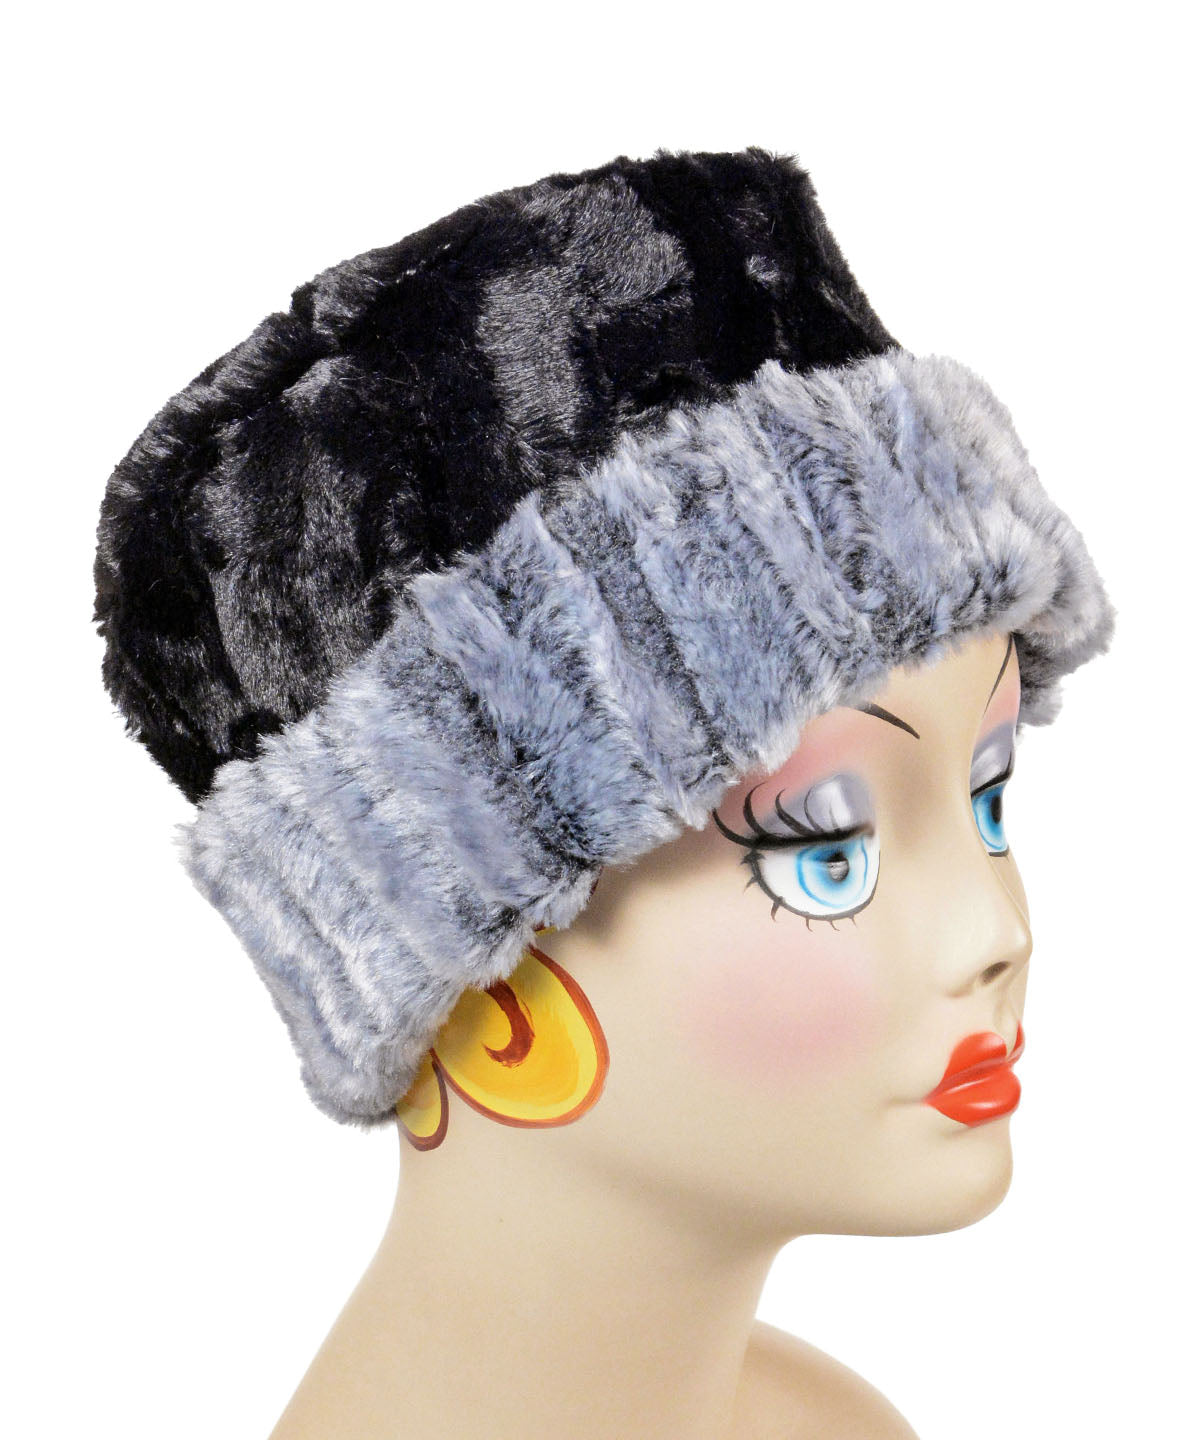 Shown in Reversed. Cuffed Pillbox Hat, Reversible two tone Luxury Faux Fur in Glacier Bay Lined with Cuddly Fur in Black by Pandemonium Millinery